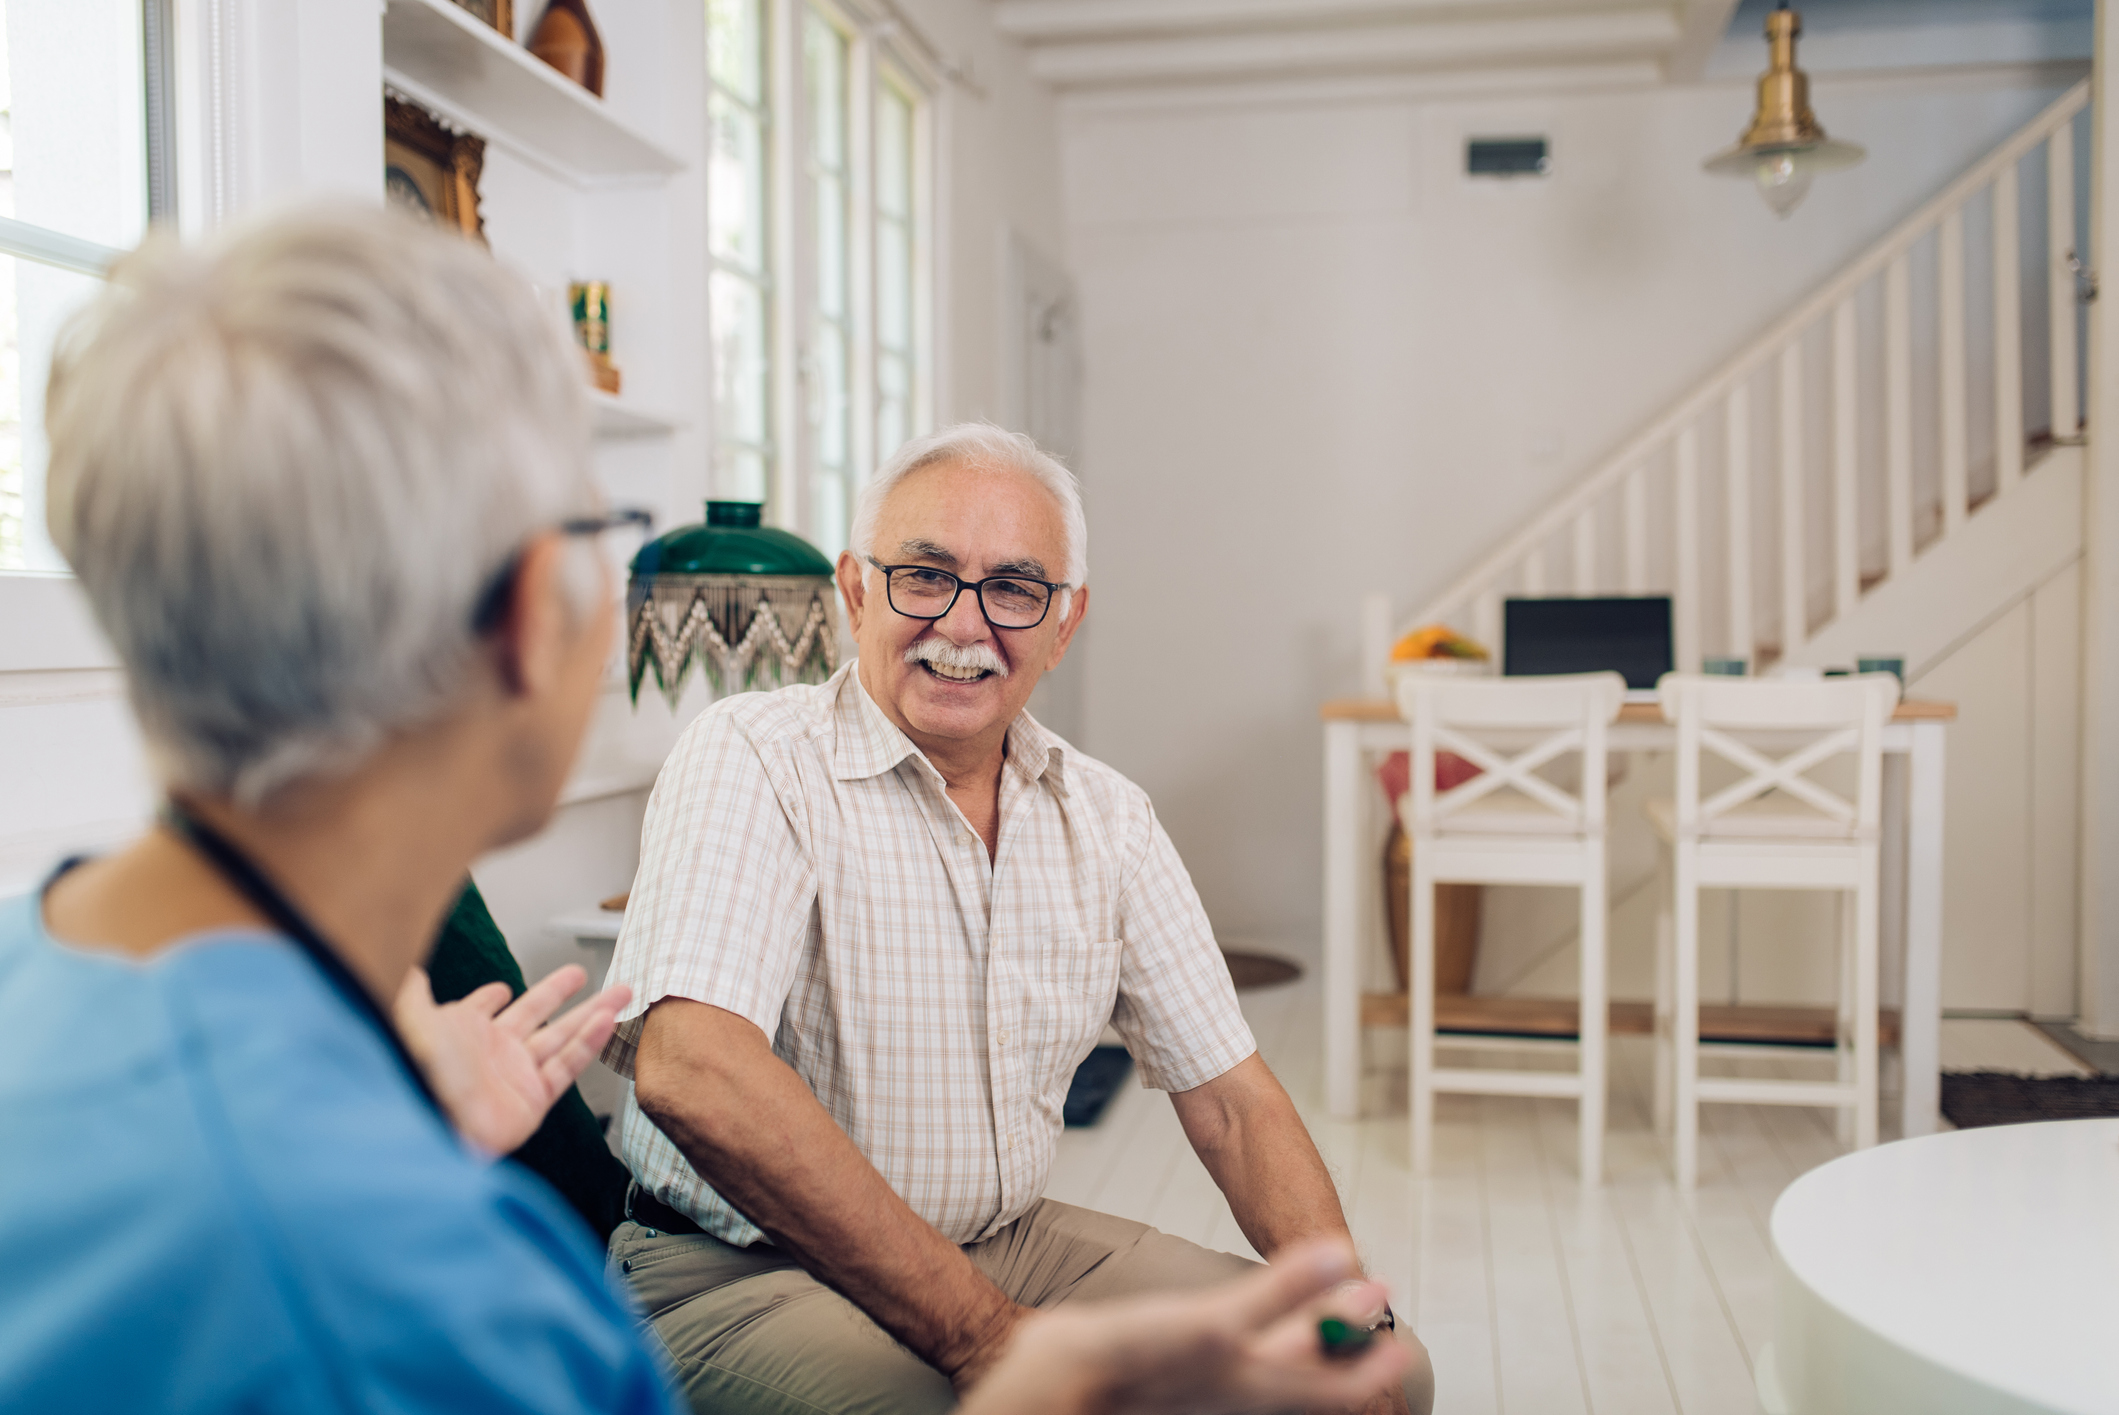 An in-home care consultation offers help when caring for aging parents.